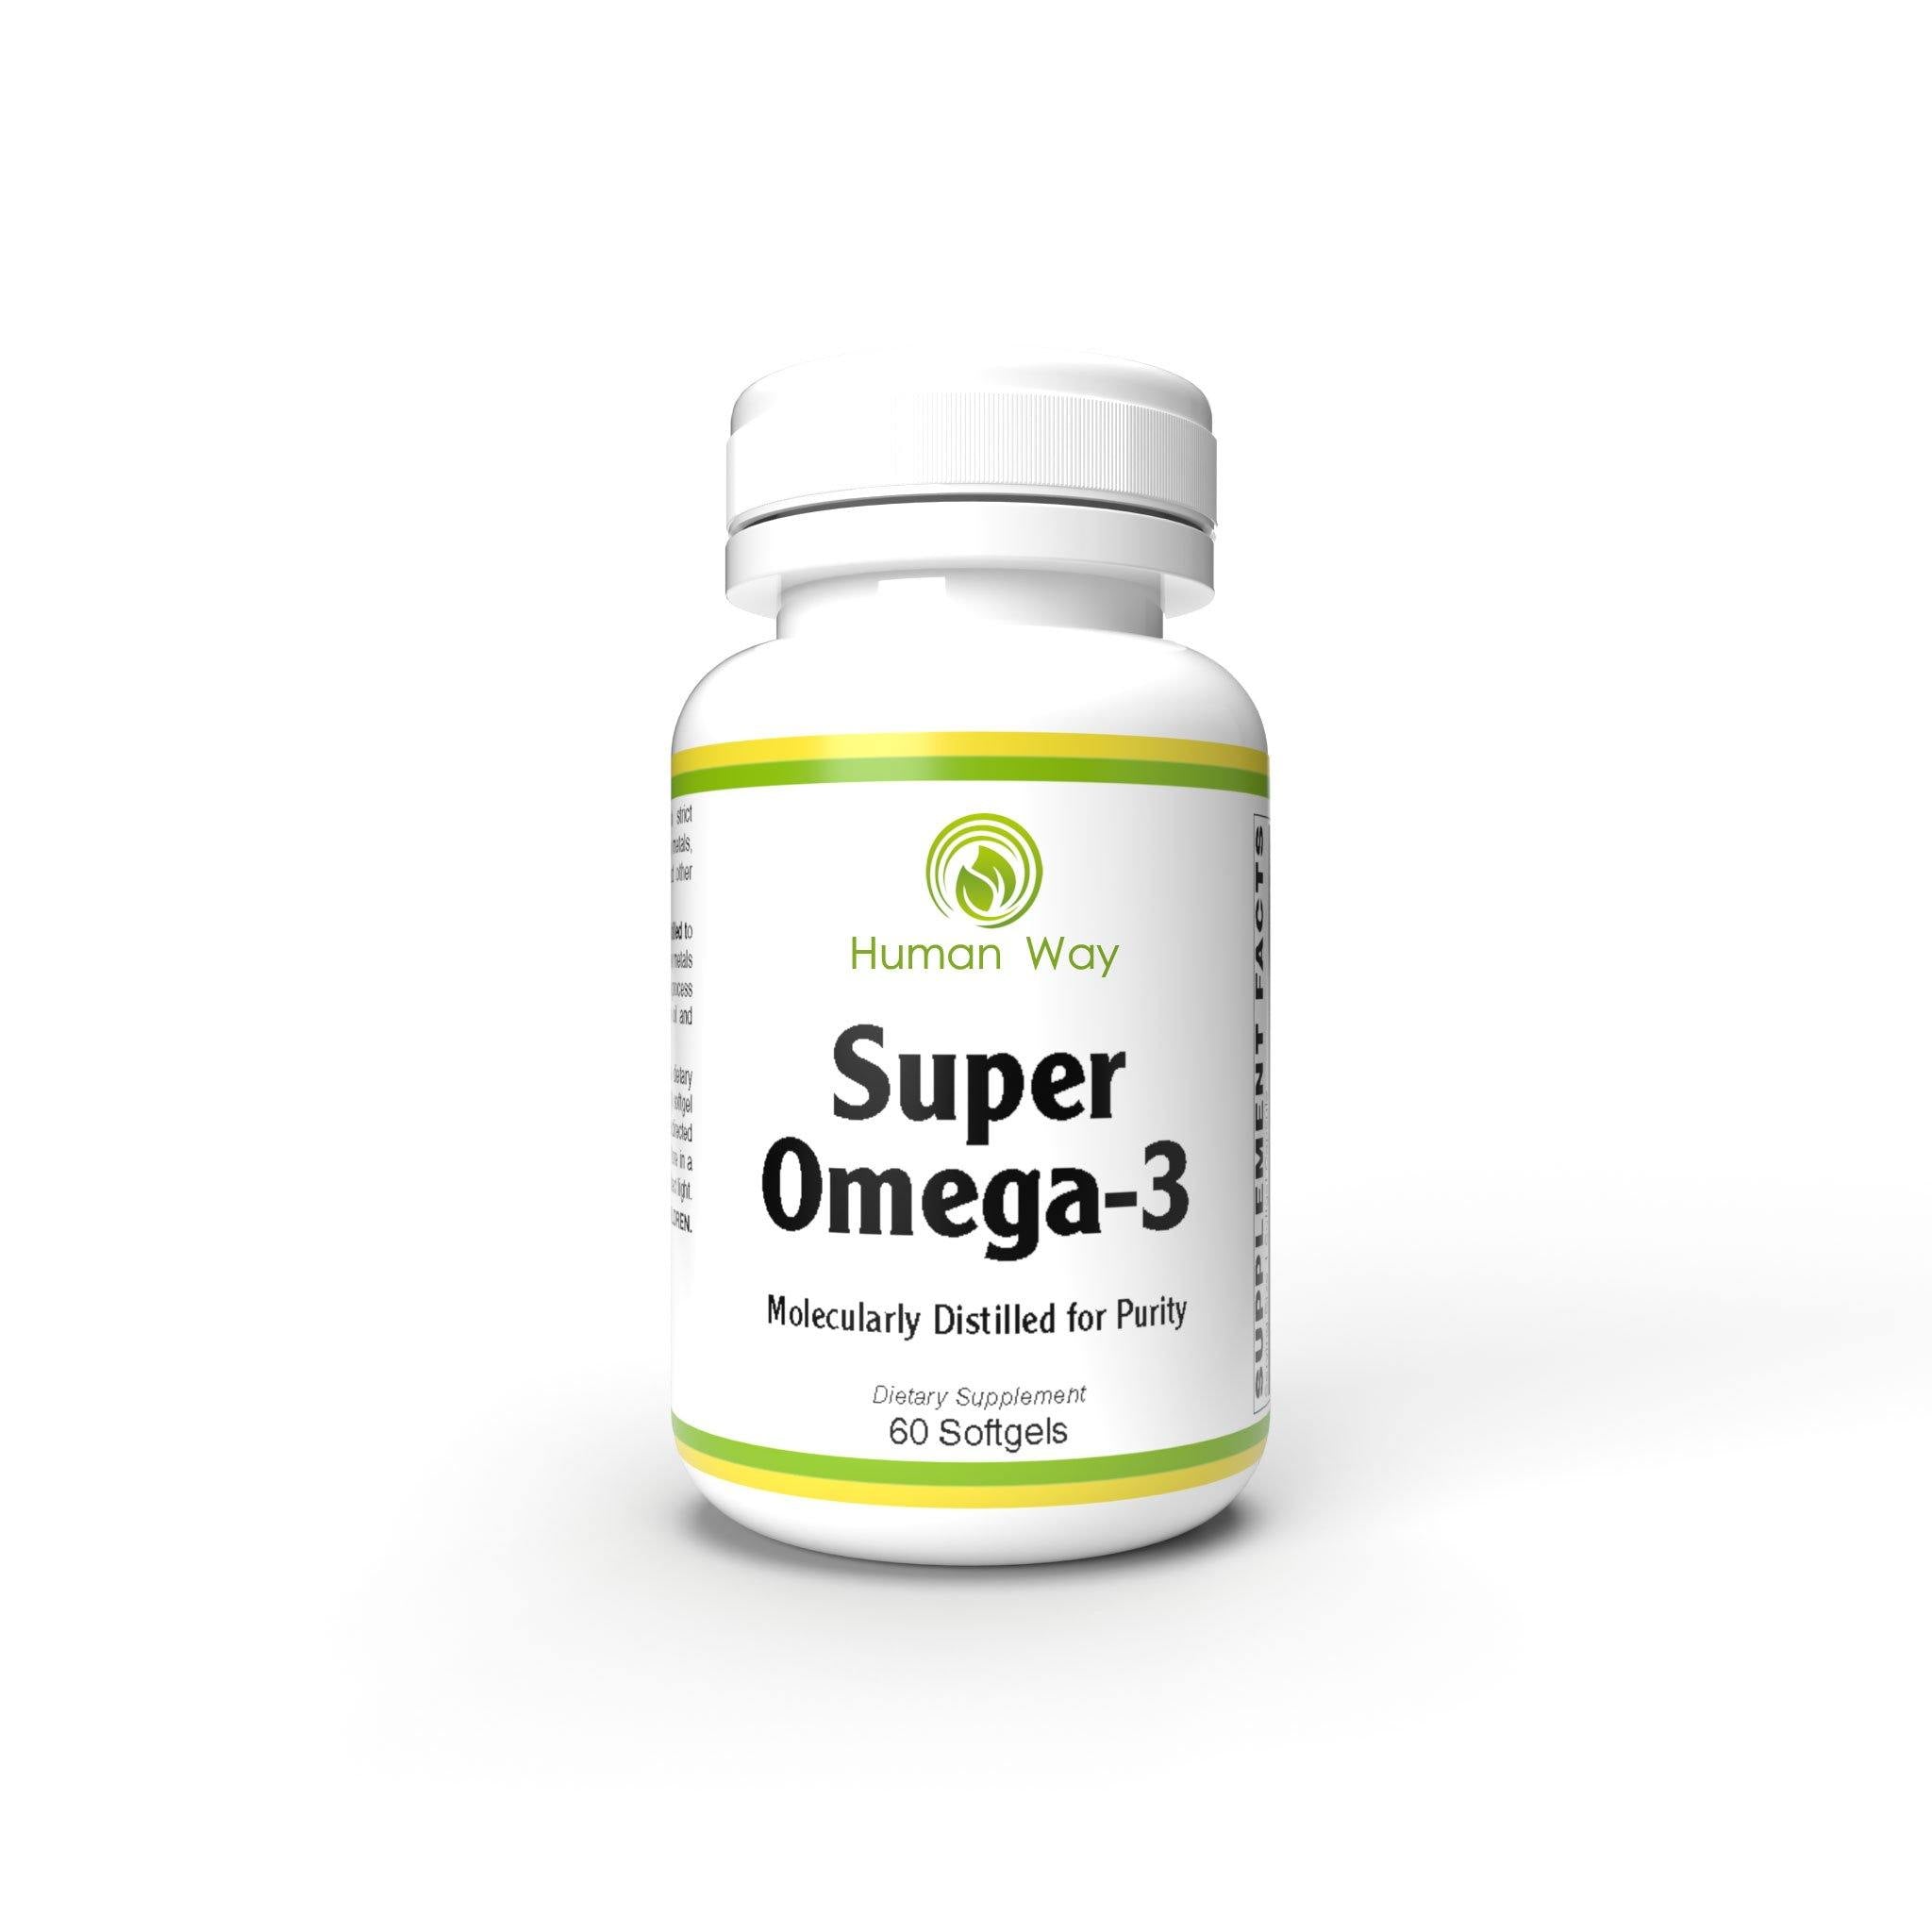 Super Omega 3 High potency omega-3 fish oil with 300mg of EPA and 200mg of DHA.